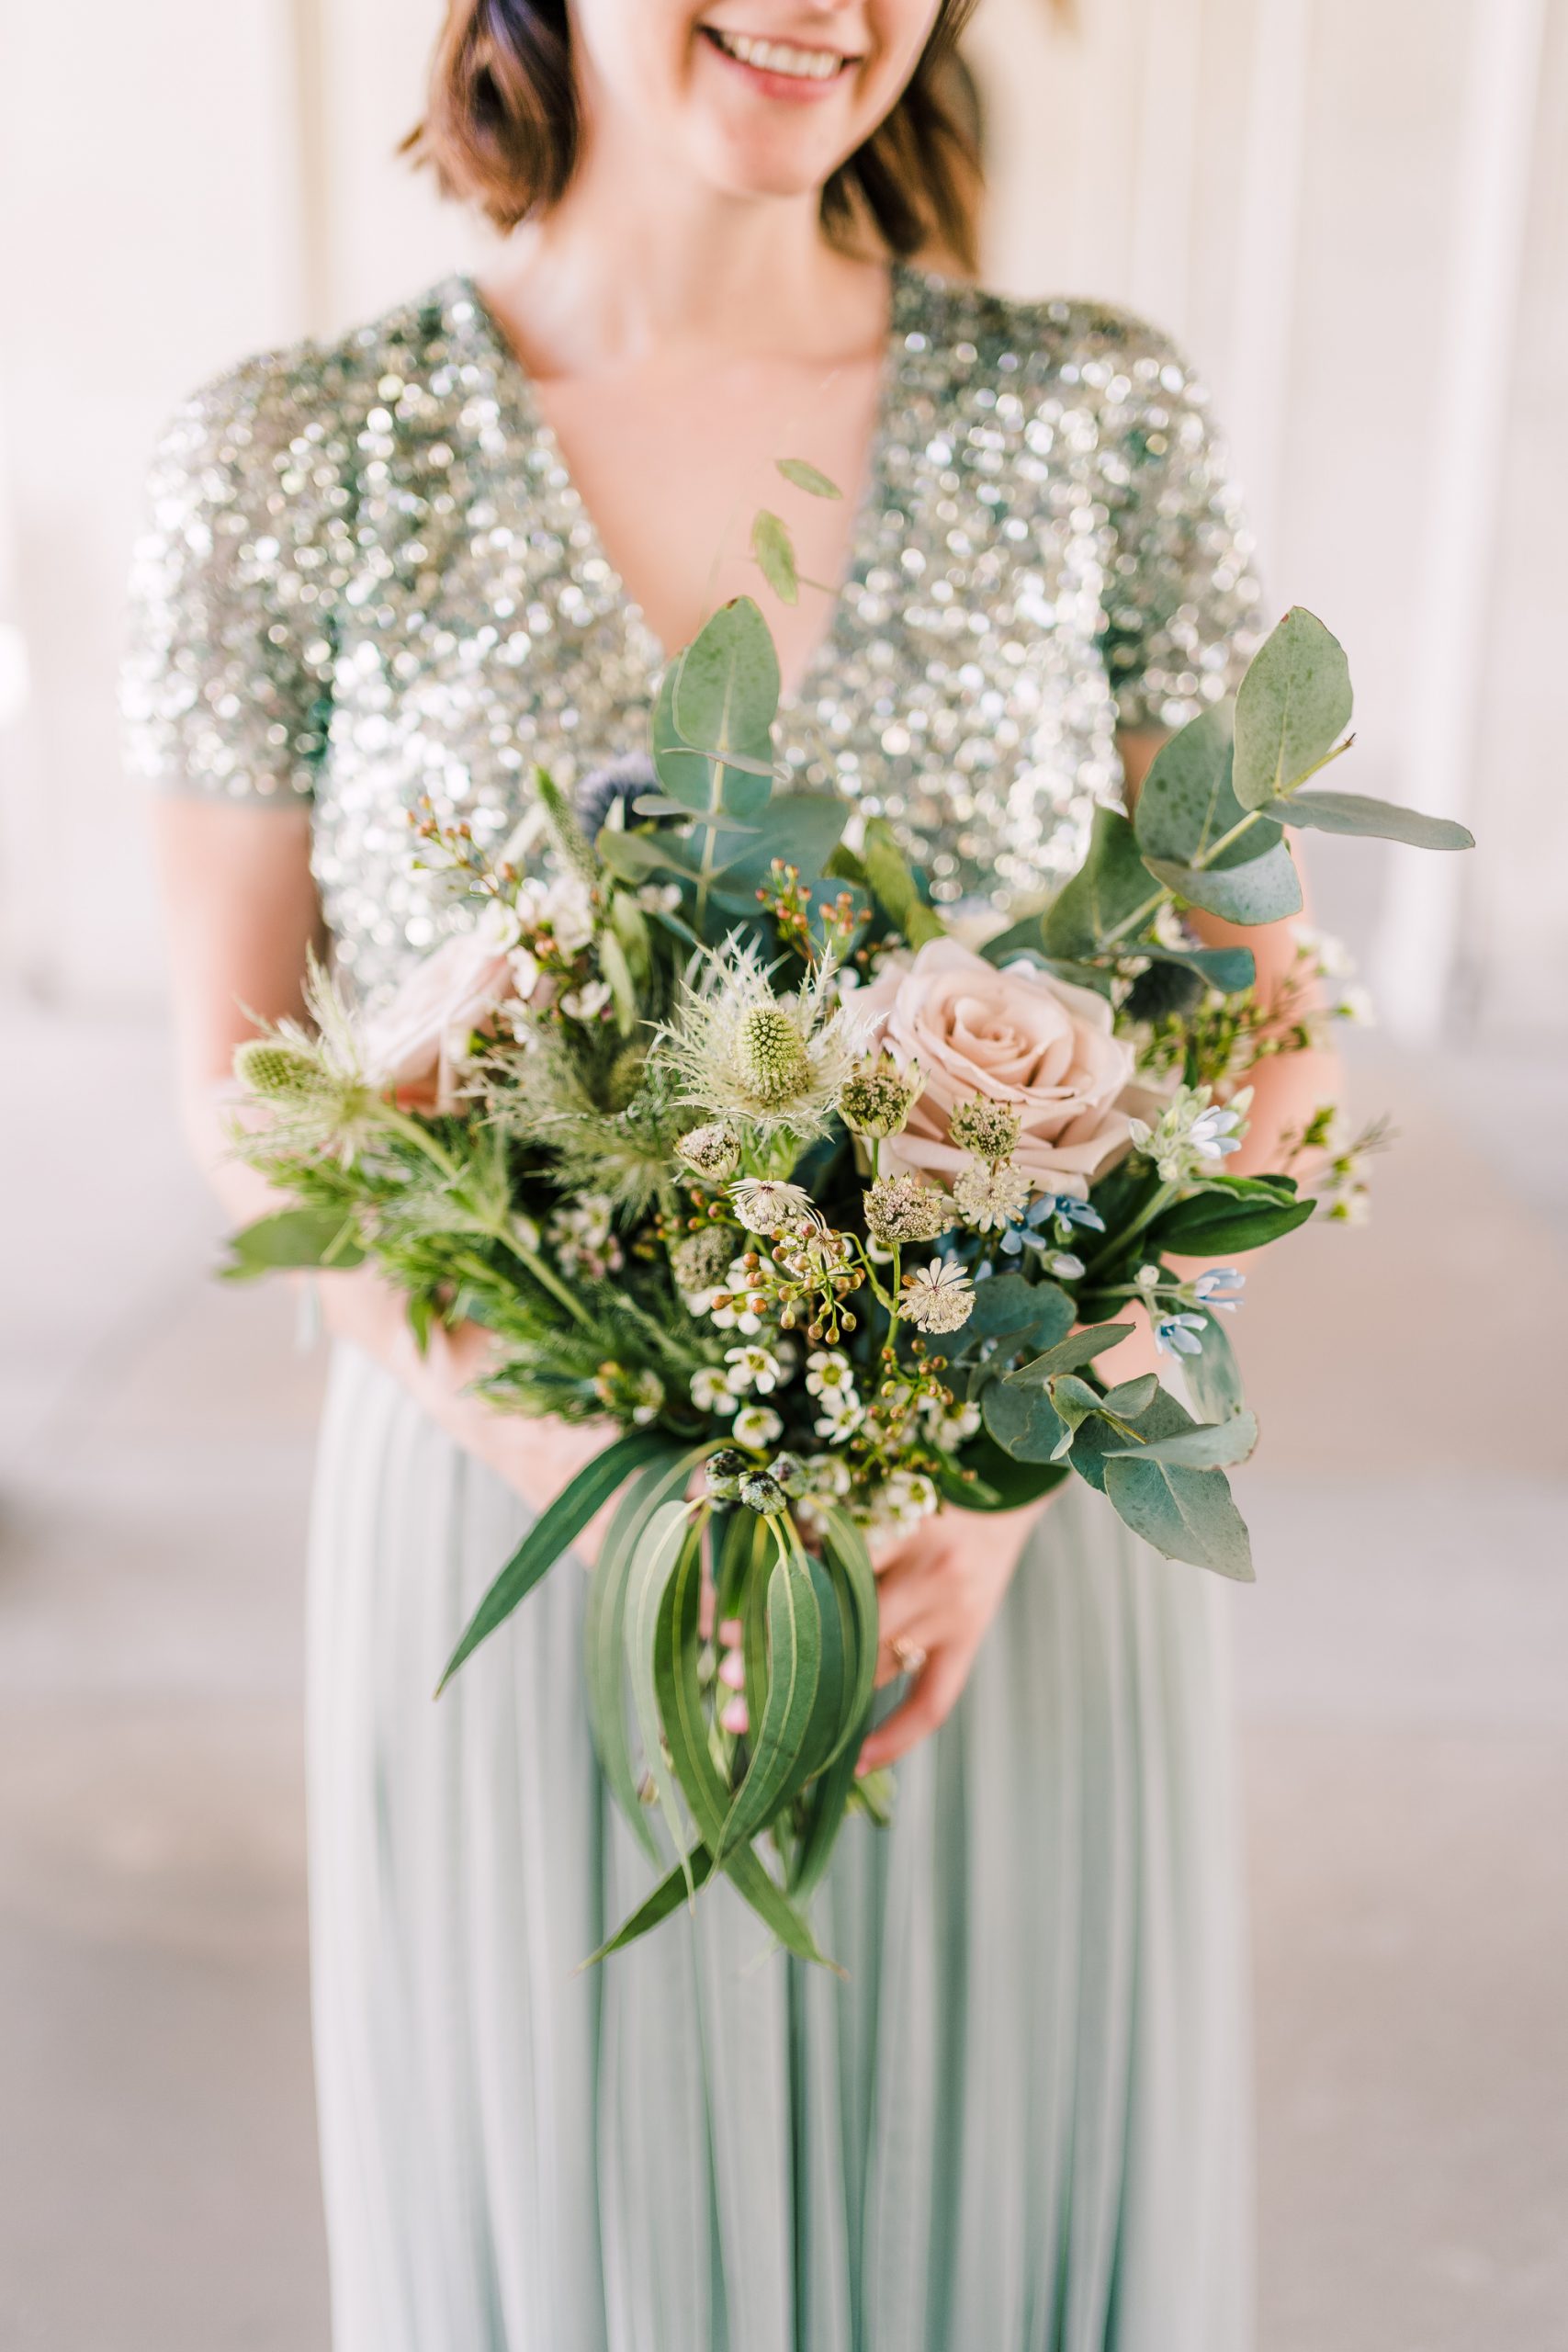 Natural country vibe wedding flowers